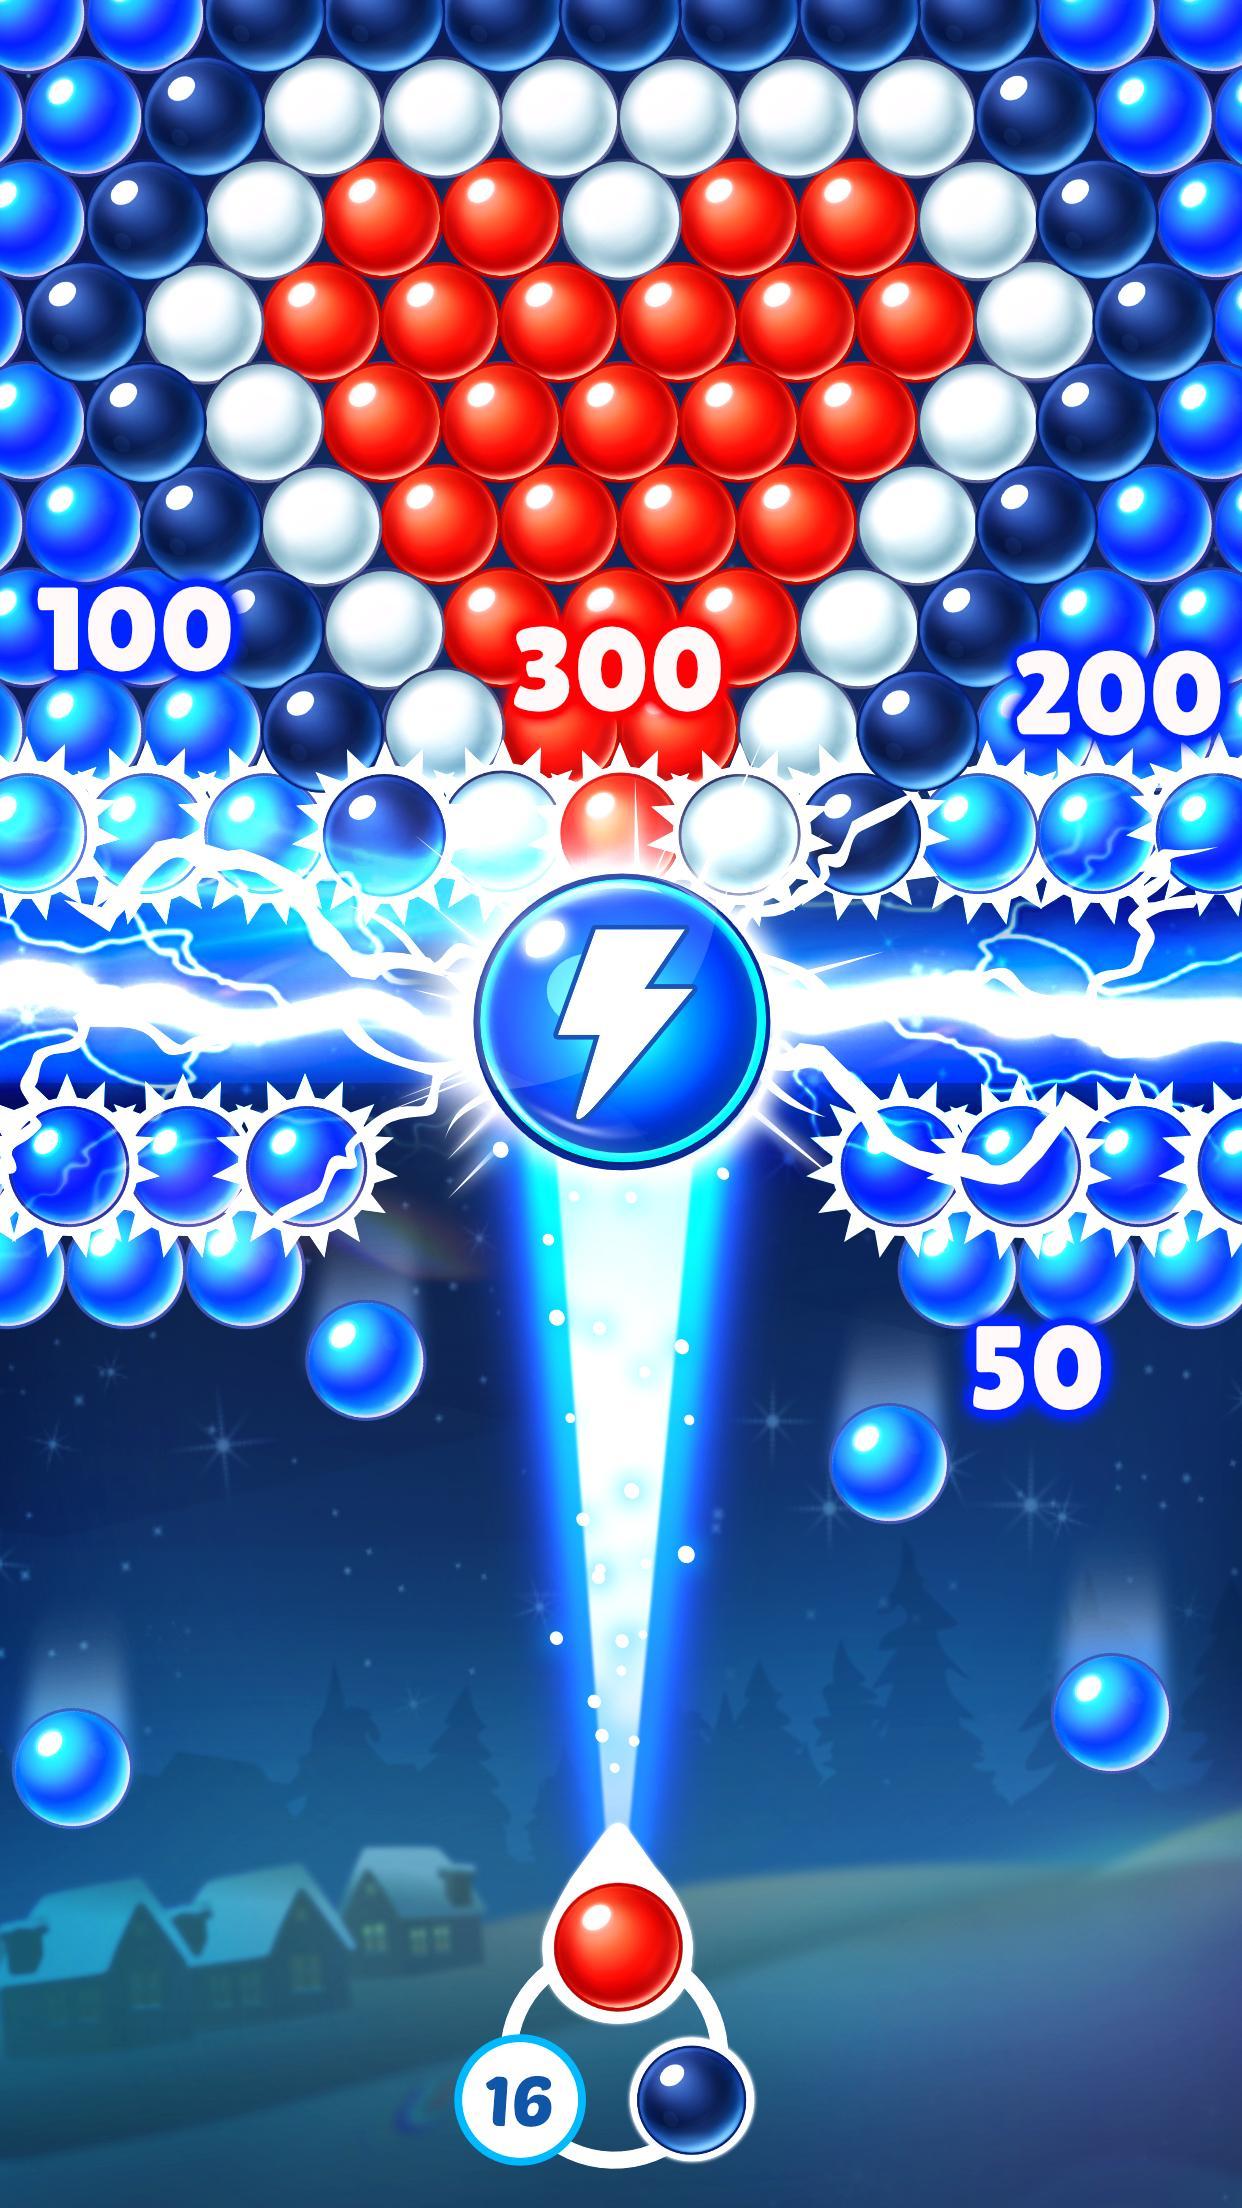 Screenshot 1 of Bubble Shooter- Pastry Pop 2.7.9